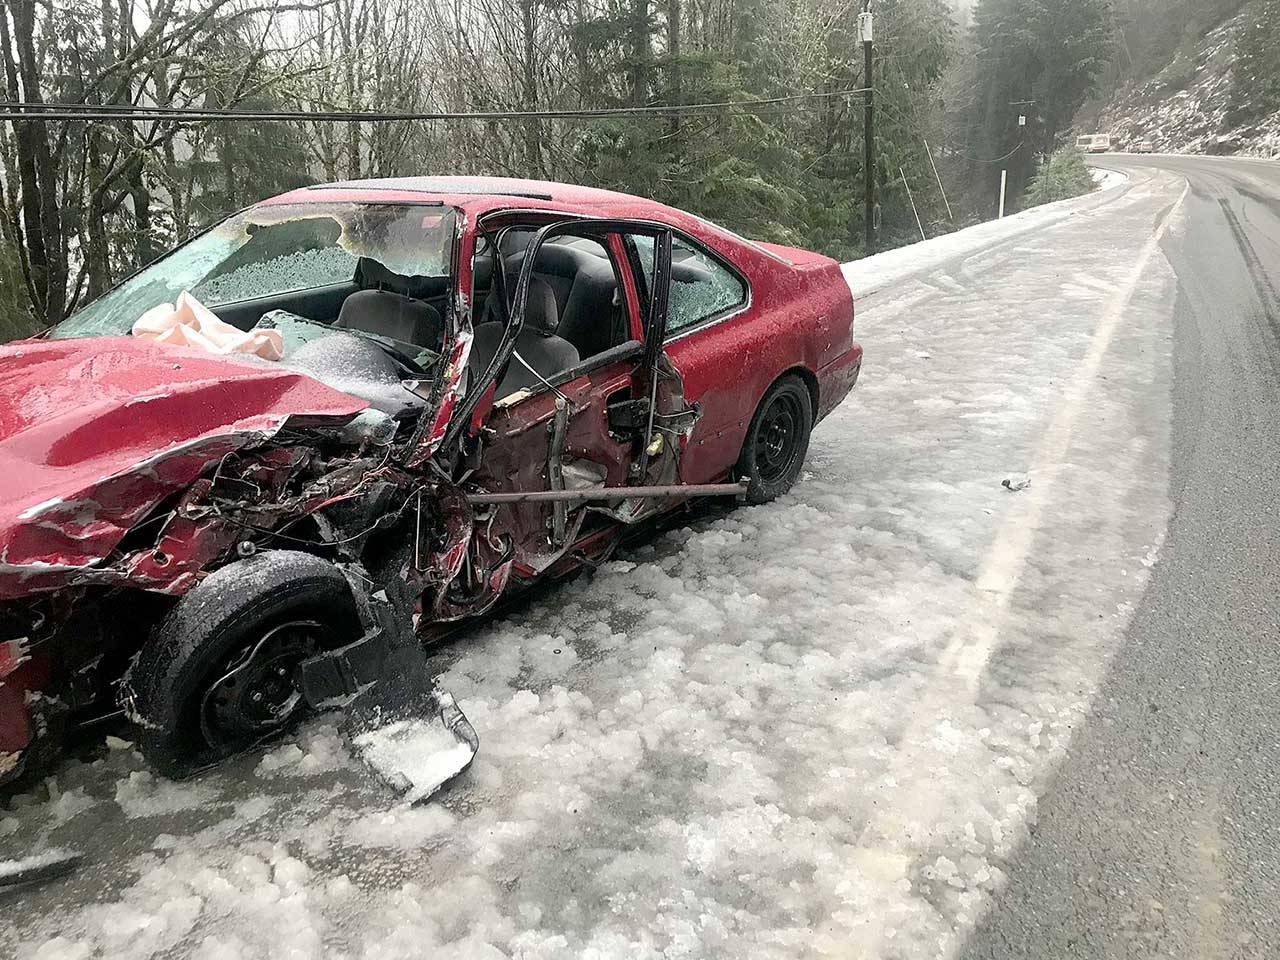 A Forks woman was transported to a hospital after her vehicle collided with a Clallam Transit bus Monday, Dec. 21, 2020. (Photo courtesy of Washington State Patrol)